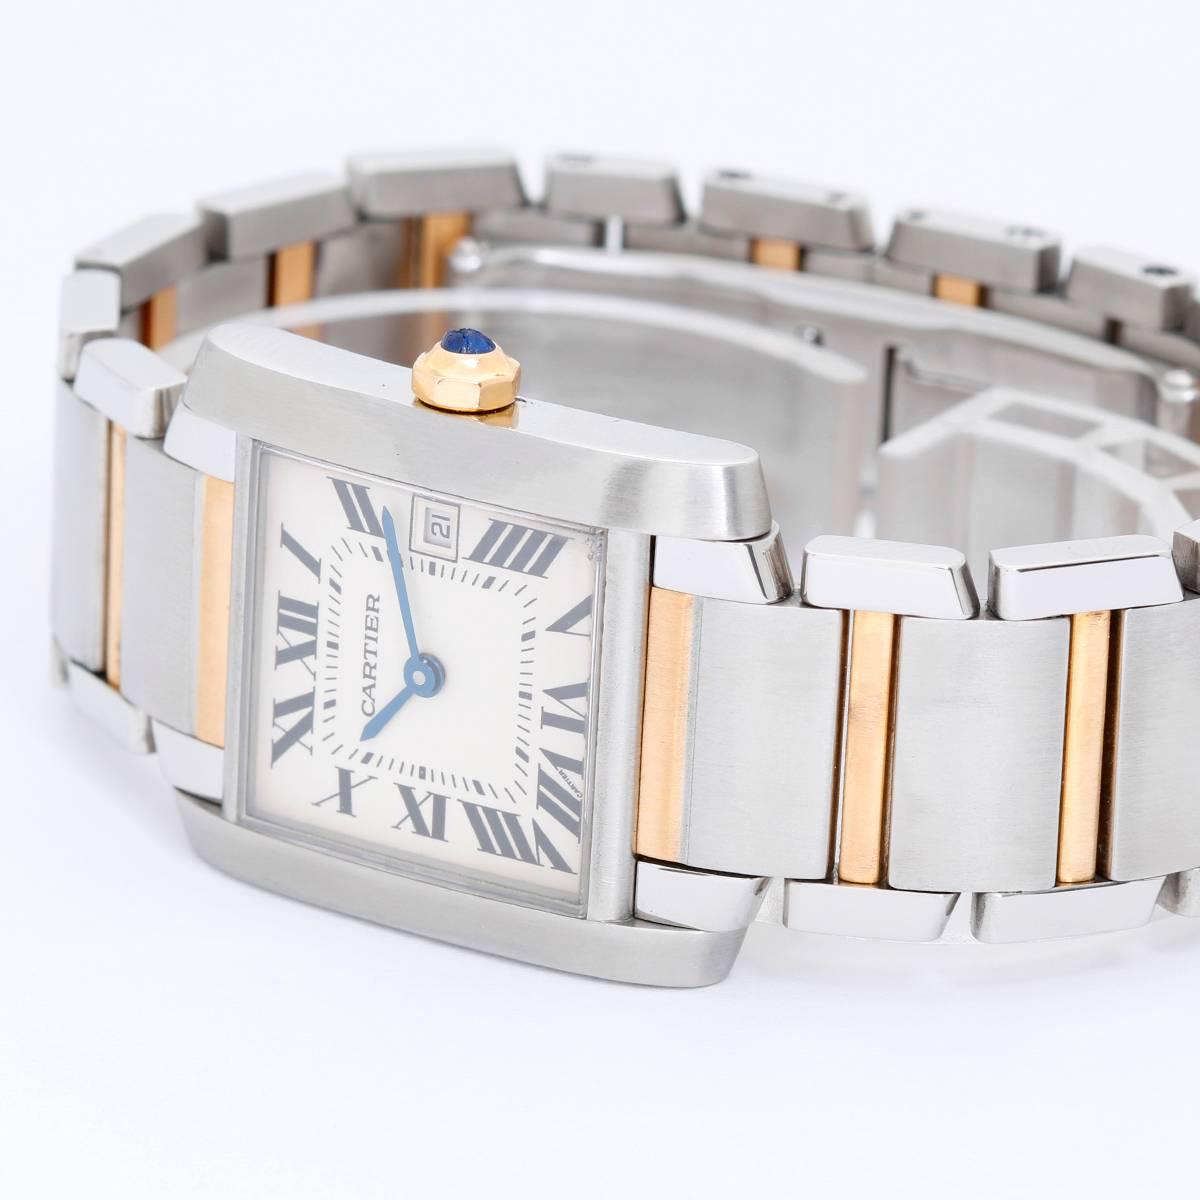 Cartier Tank Francaise Men's 2-Tone Watch W51005Q4 -  Quartz. Stainless steel case (28mm x 35mm). Silver guilloche dial with black Roman numerals; date at 3 o'clock. Stainless steel and 18k yellow gold Cartier bracelet with deployant buckle.